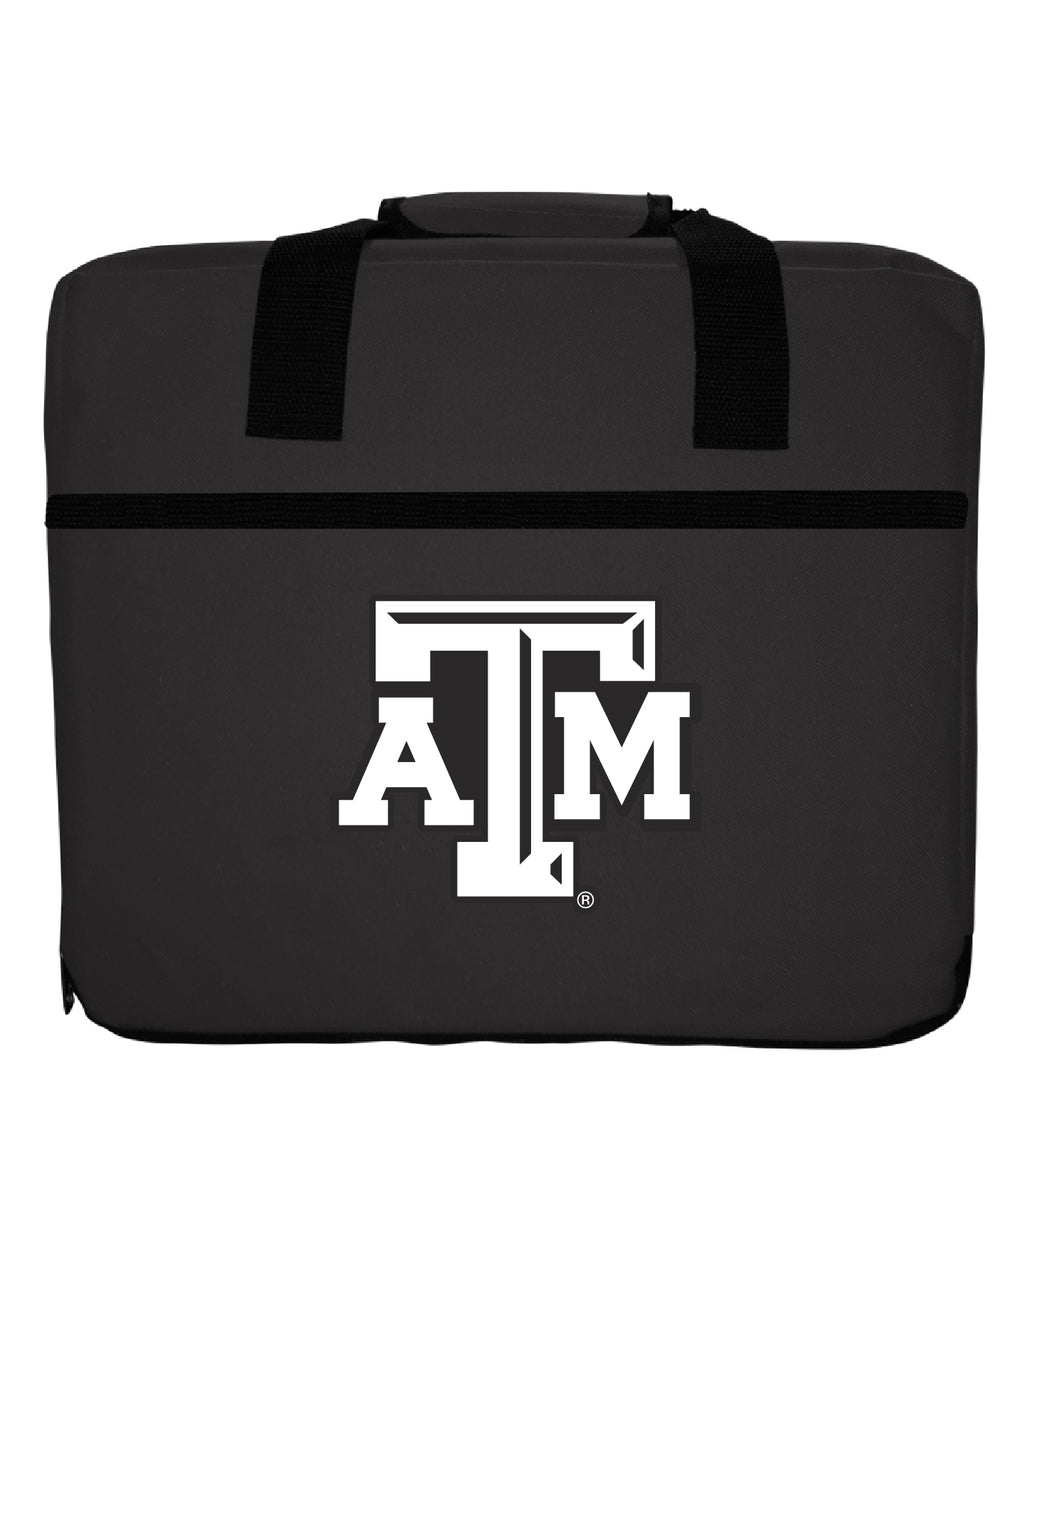 NCAA Texas A&M Aggies Ultimate Fan Seat Cushion – Versatile Comfort for Game Day & Beyond